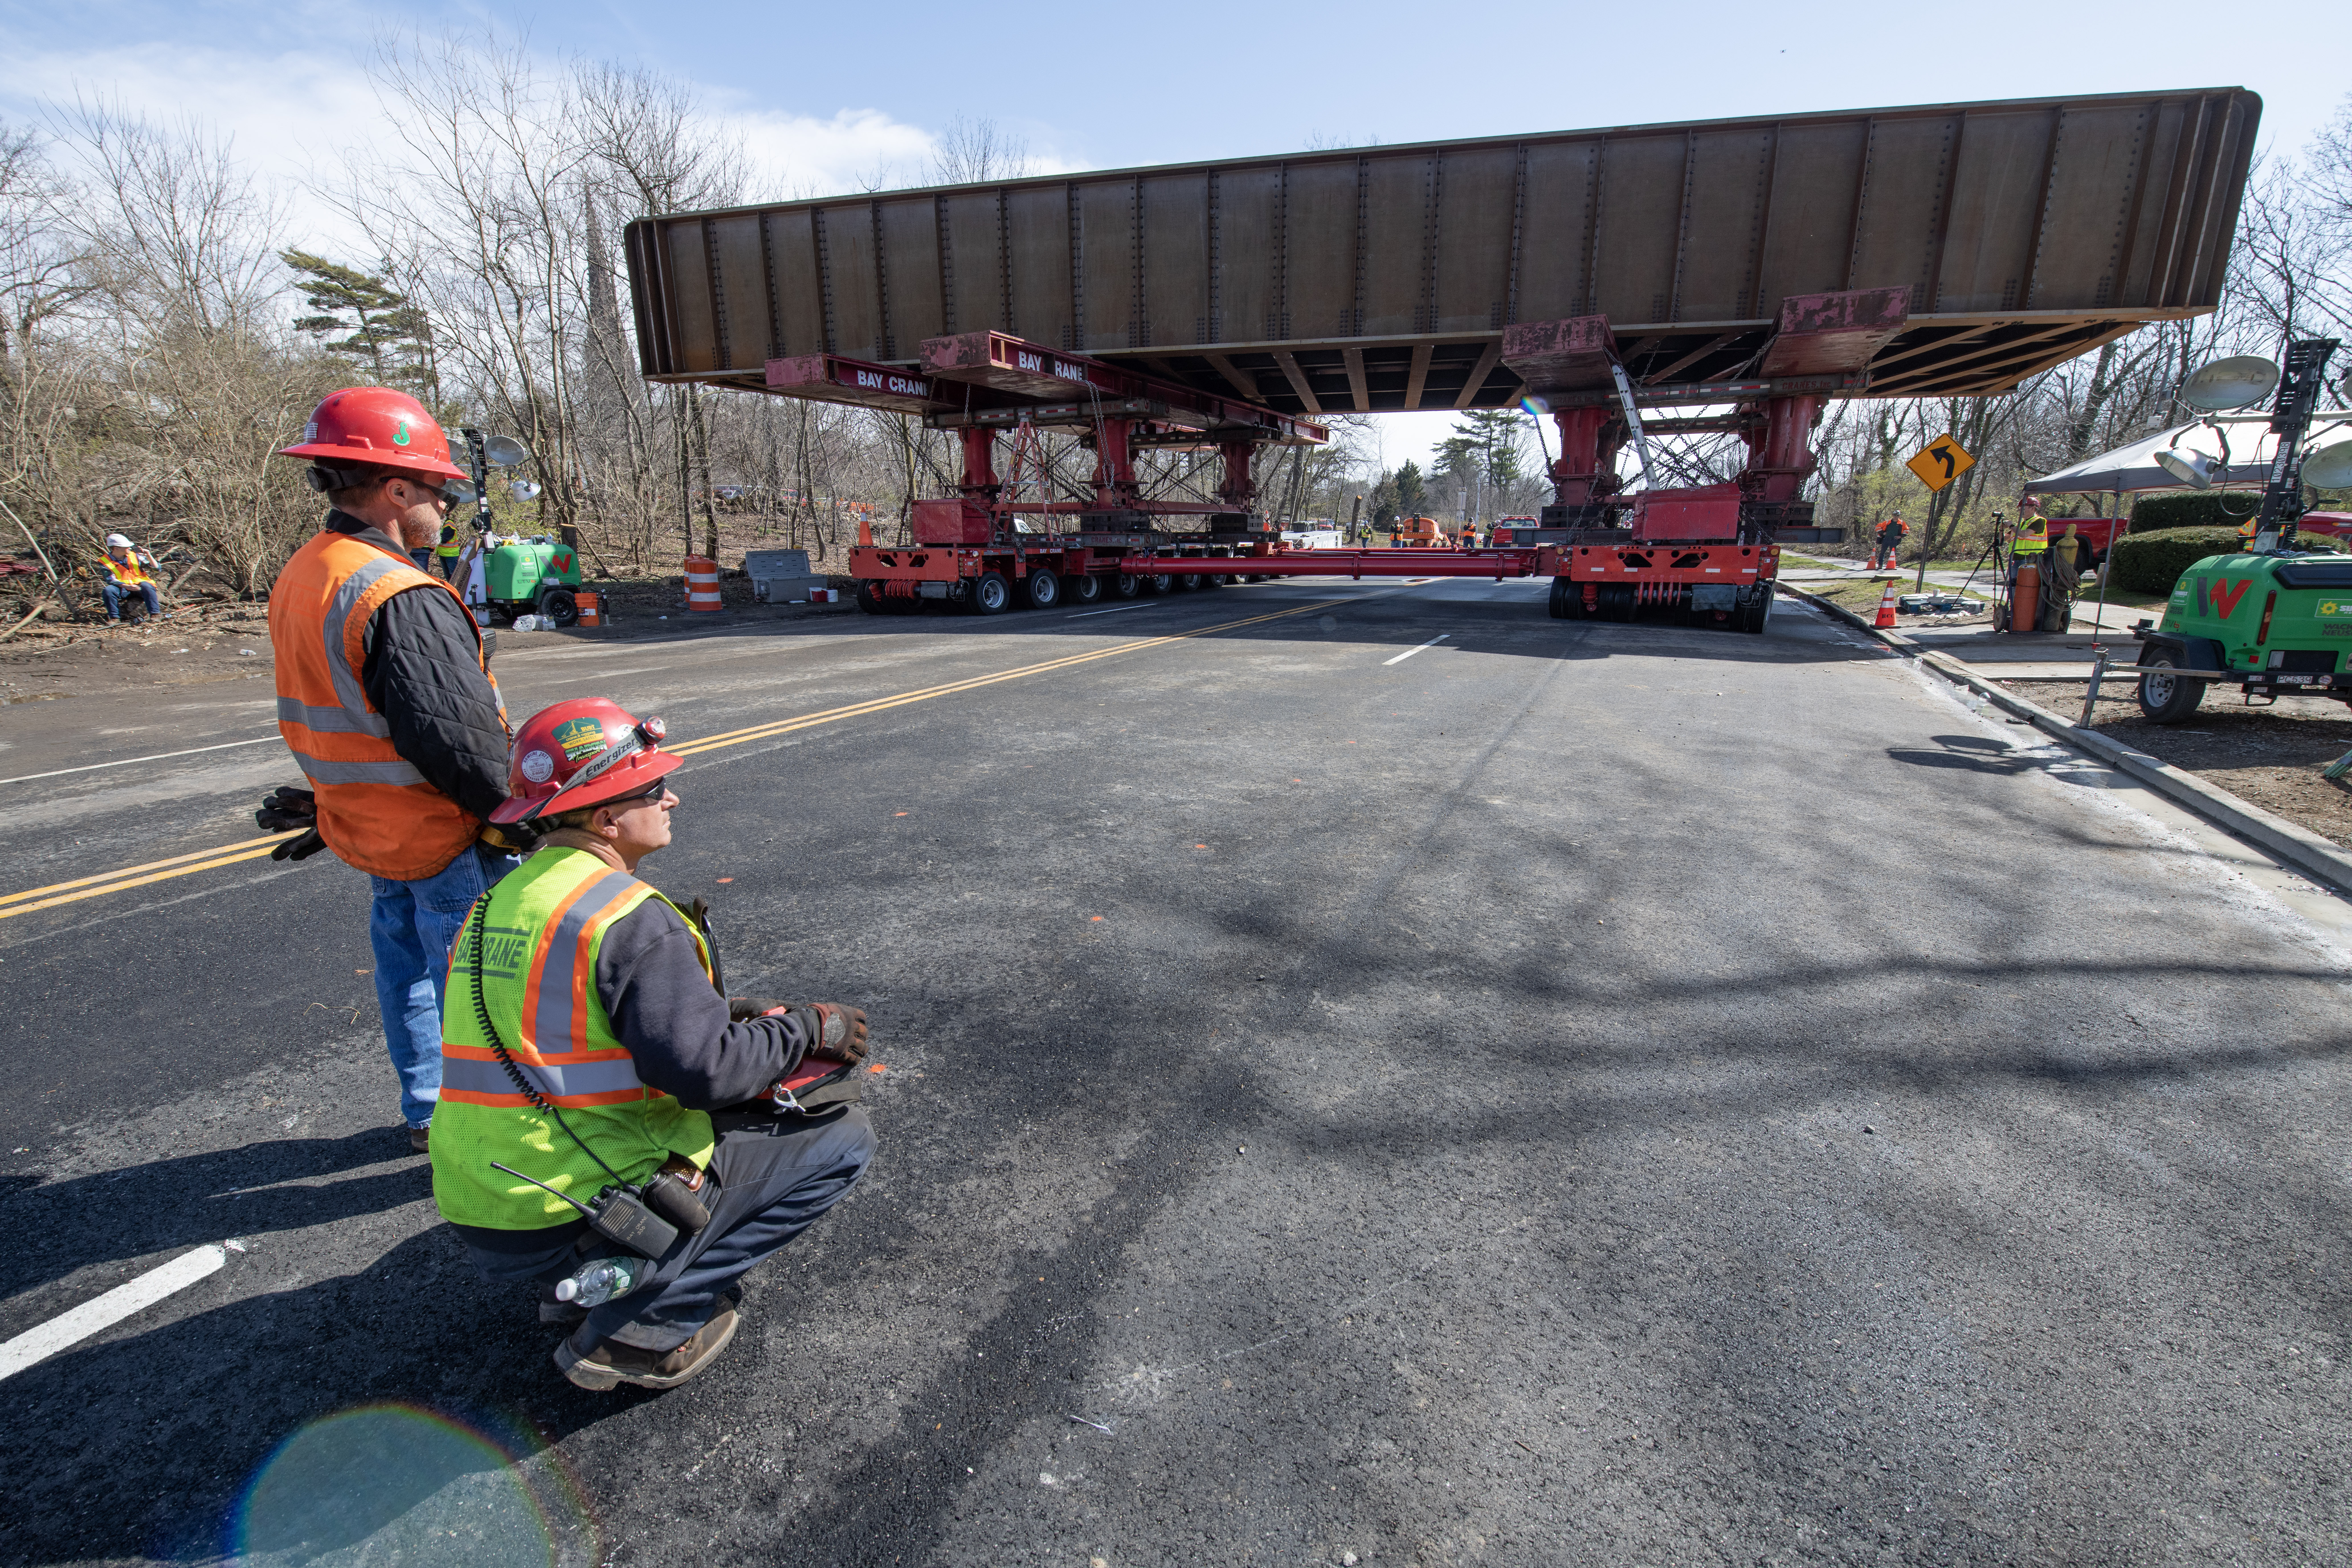 MTA Unveils Raised and Completed Replacement of Low-Lying Frequently Struck LIRR Bridge in Garden City